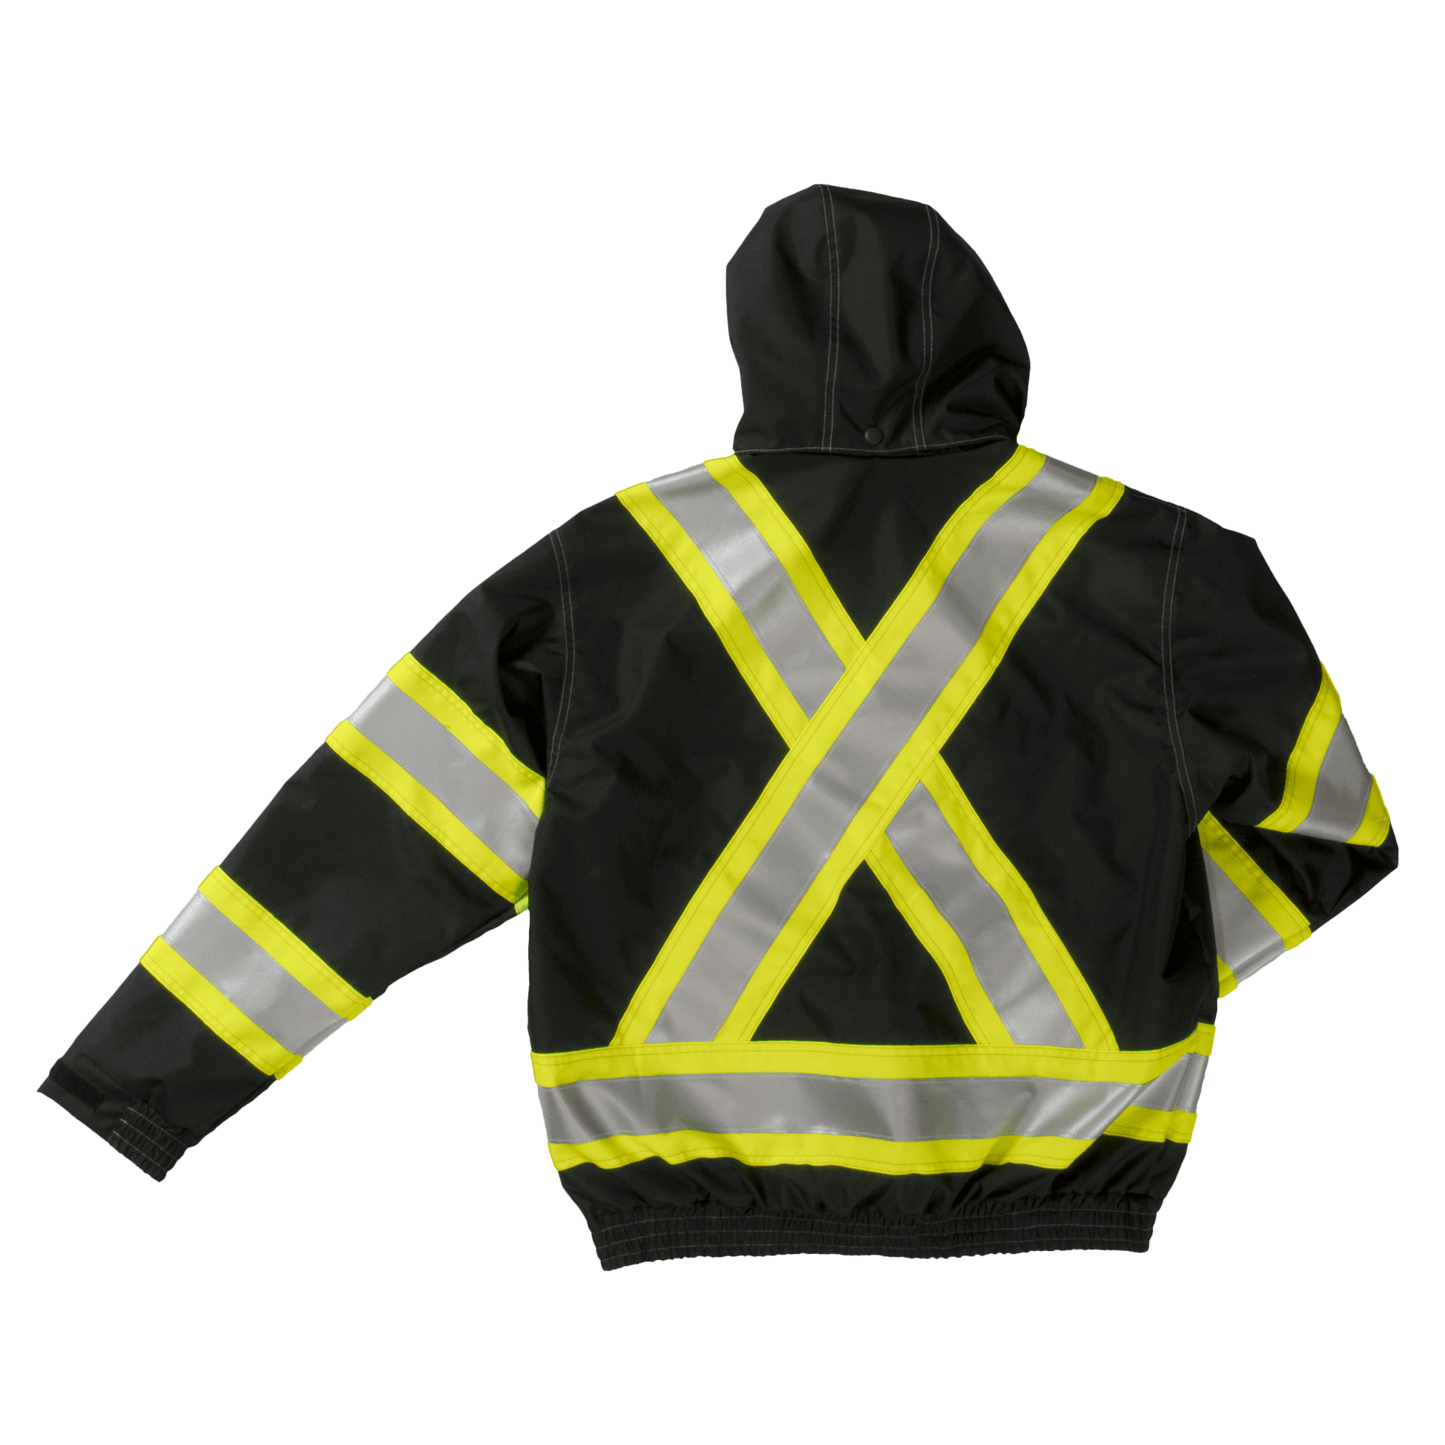 3-in-1 Safety Bomber